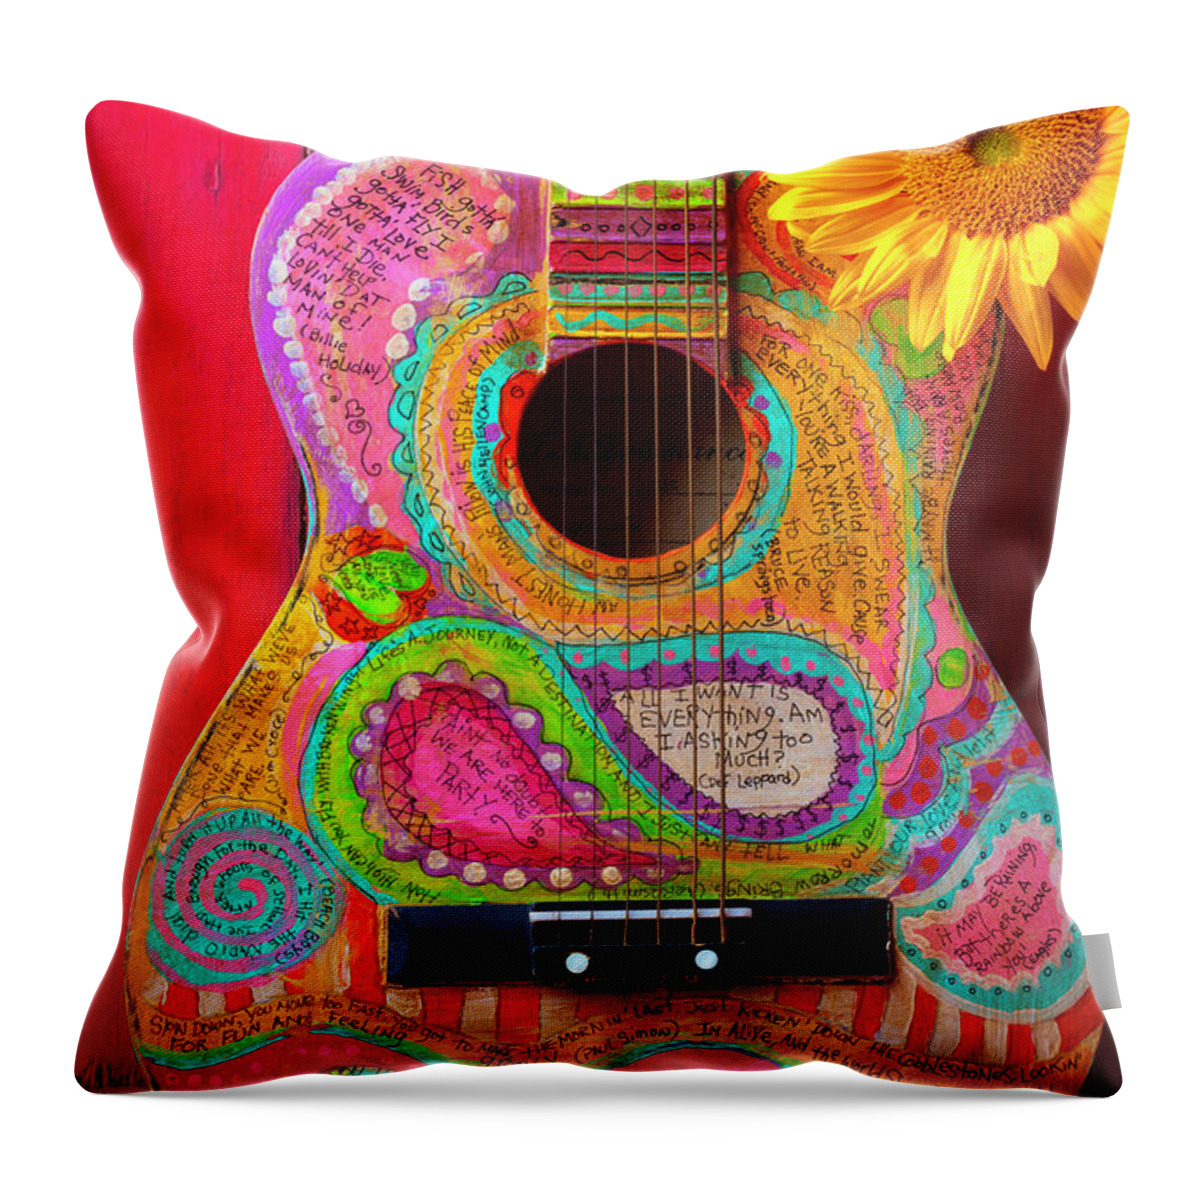 Musical Throw Pillow featuring the photograph Poetry Guitar Leaning Against Red Wall by Garry Gay